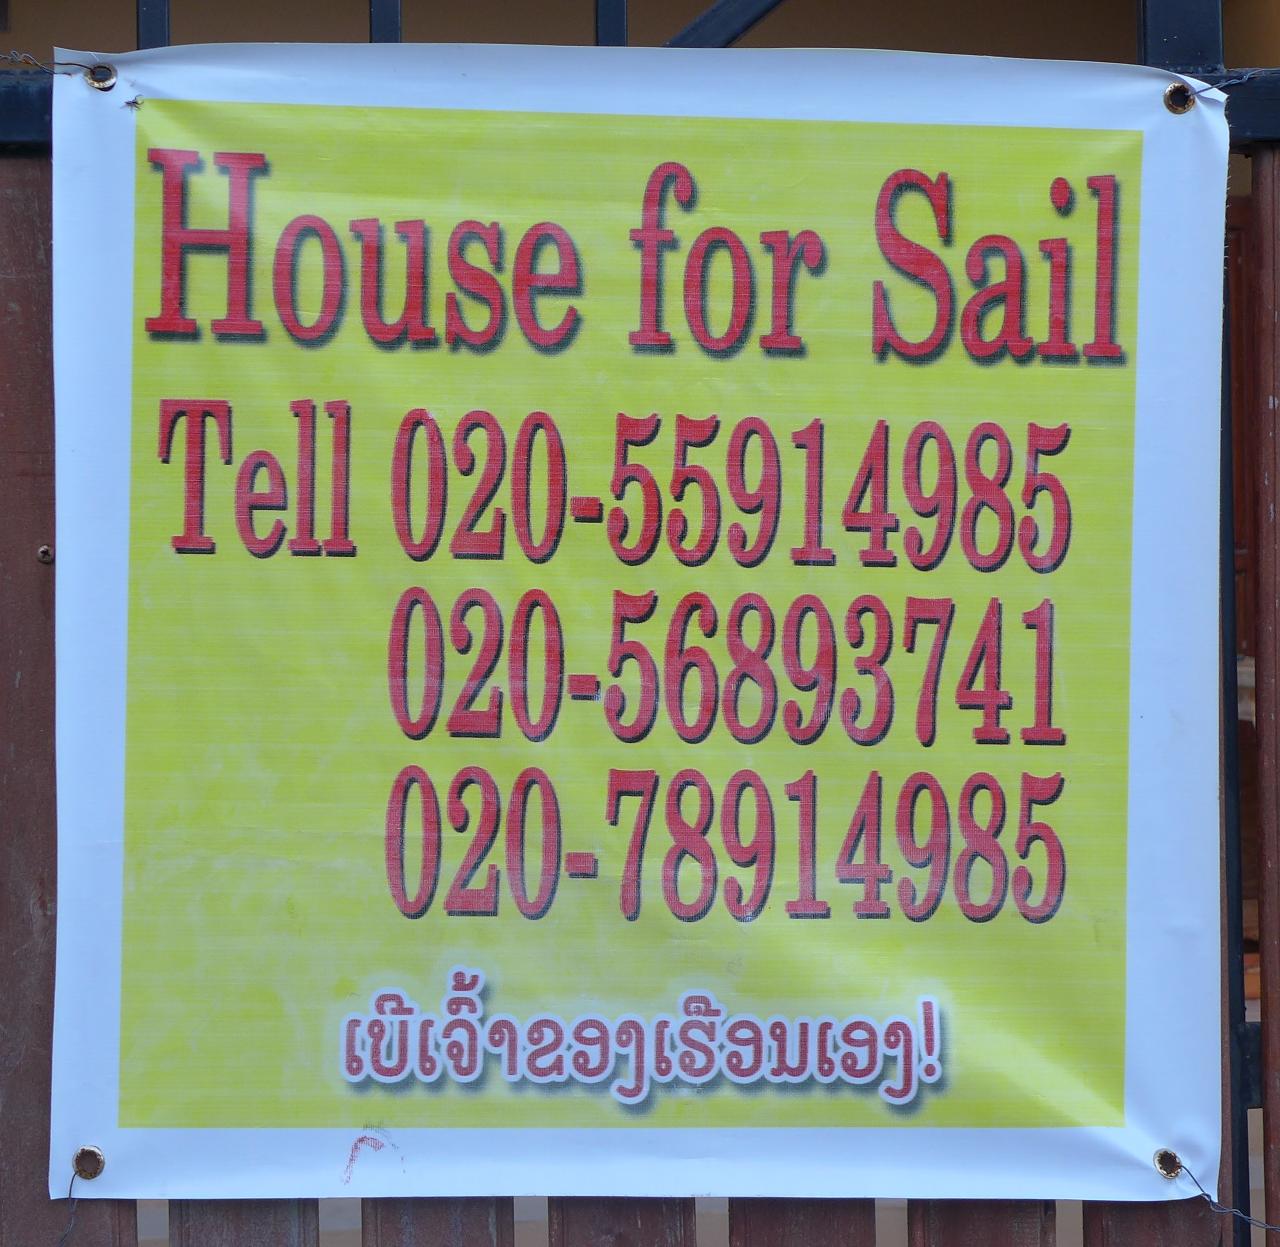 House for Sail